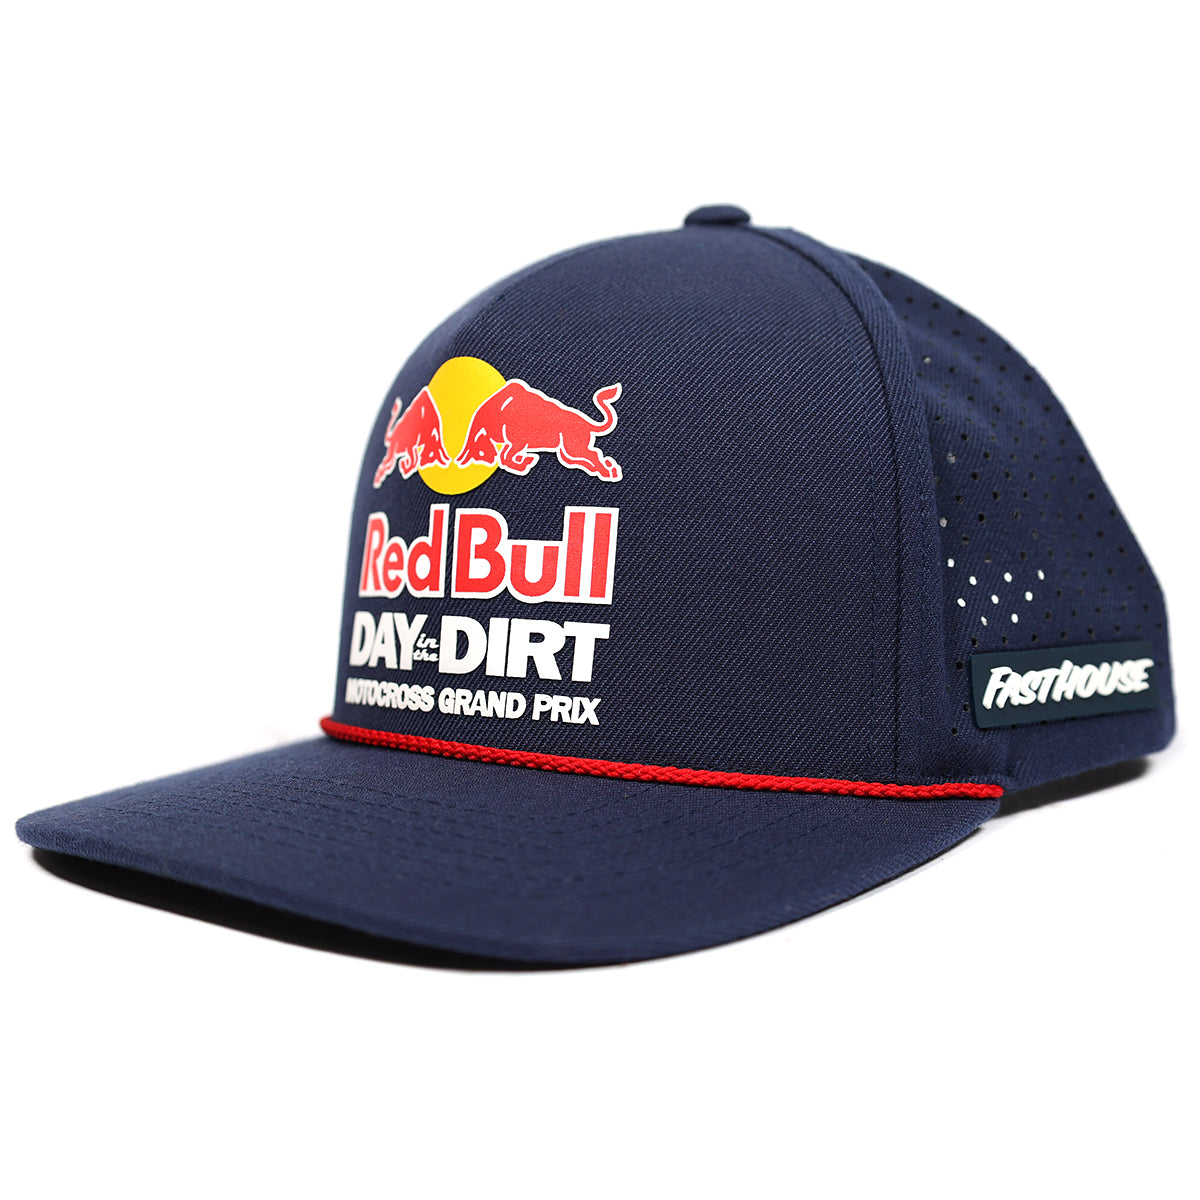 Red Bull Day in the Dirt 26 Hat - Navy